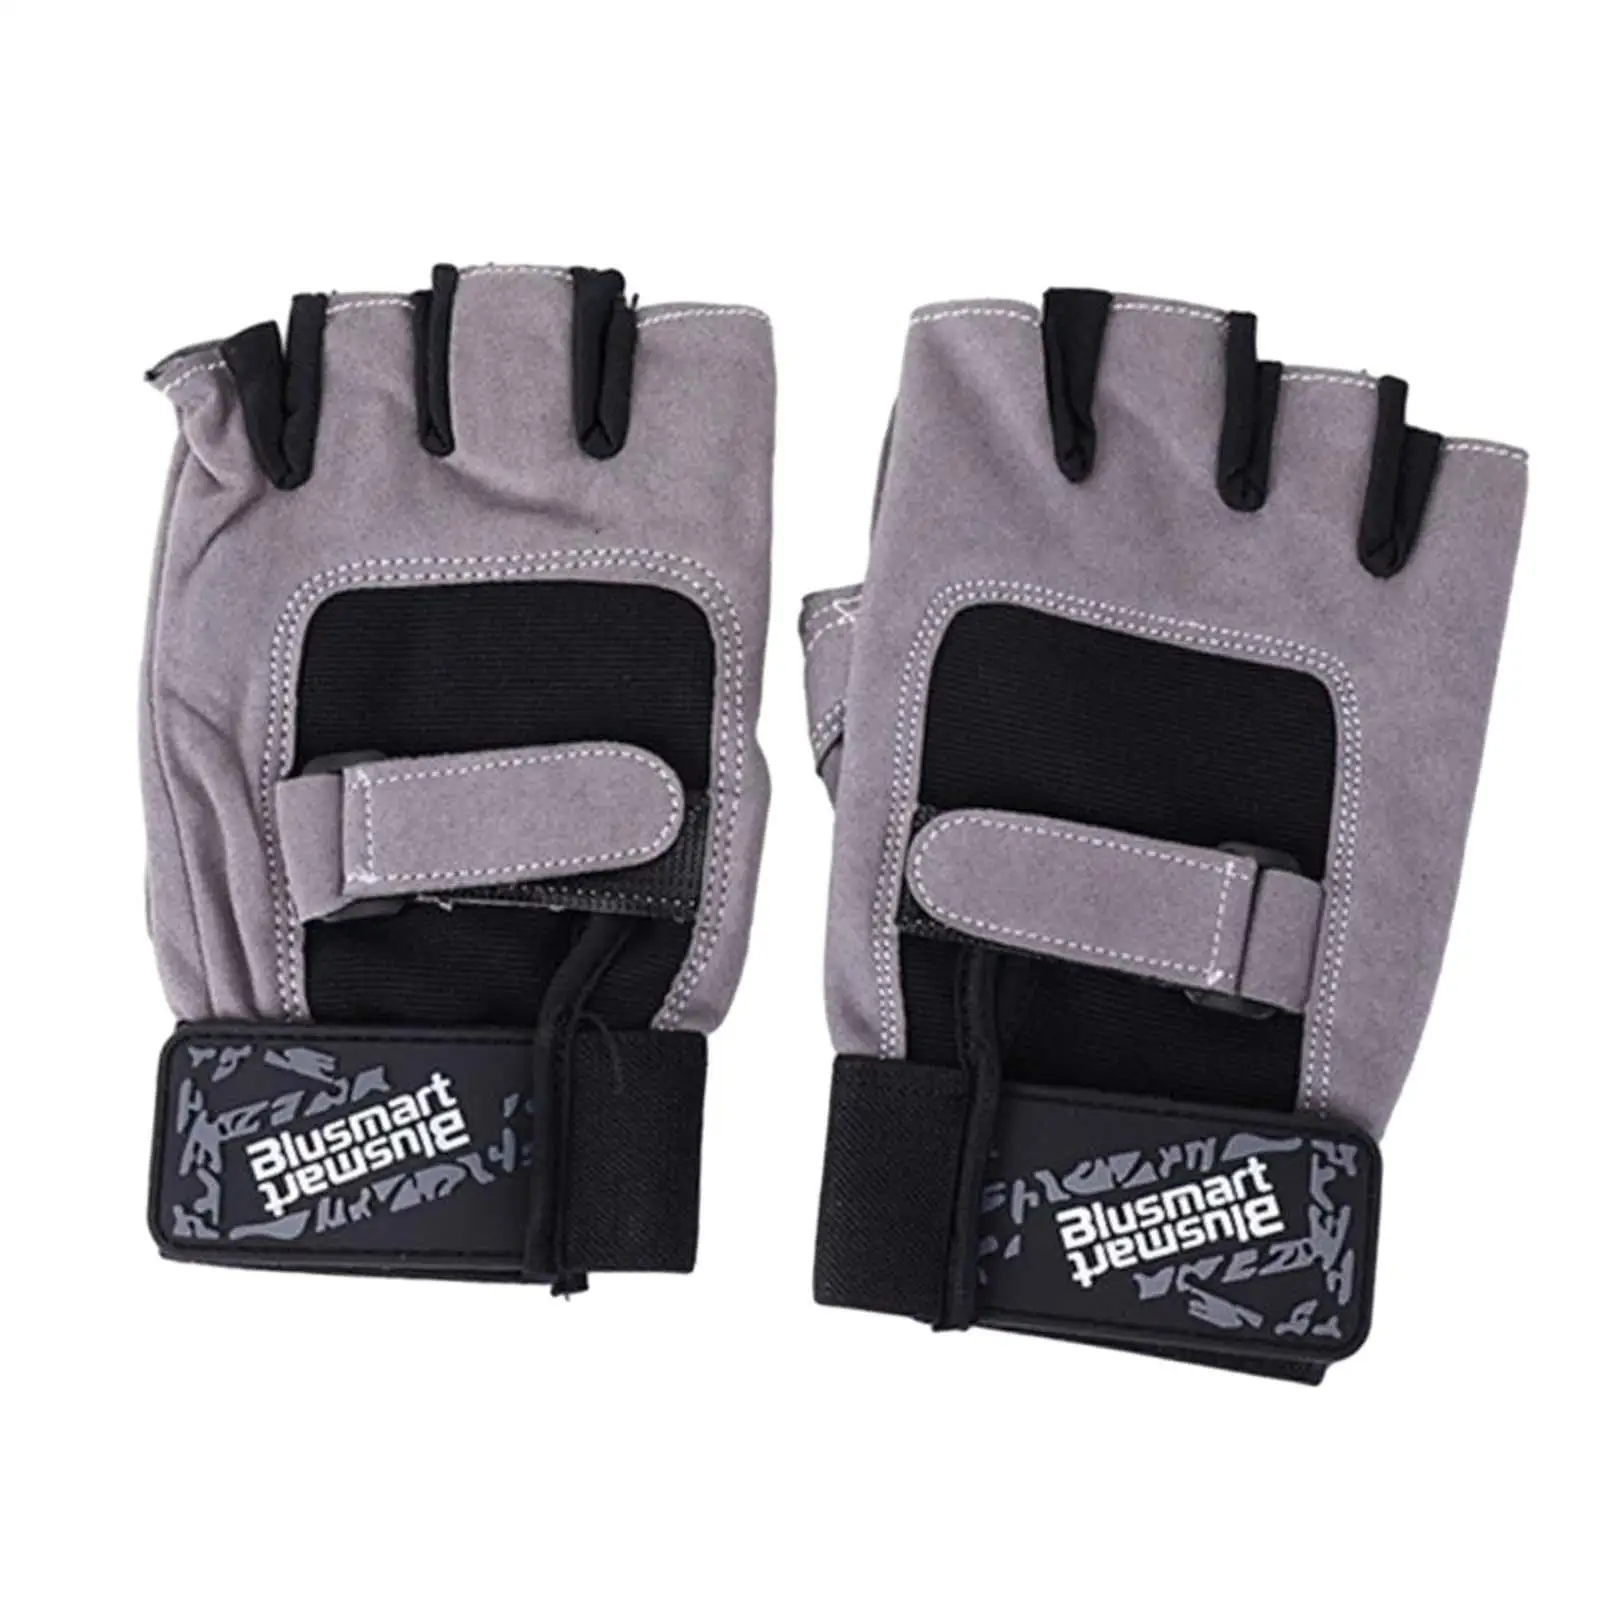 Workout Gloves Outdoor Training Bodybuilding Sports Gloves Adjustable Fitness Gloves for Training Exercise Fitness Gym Dumbbell